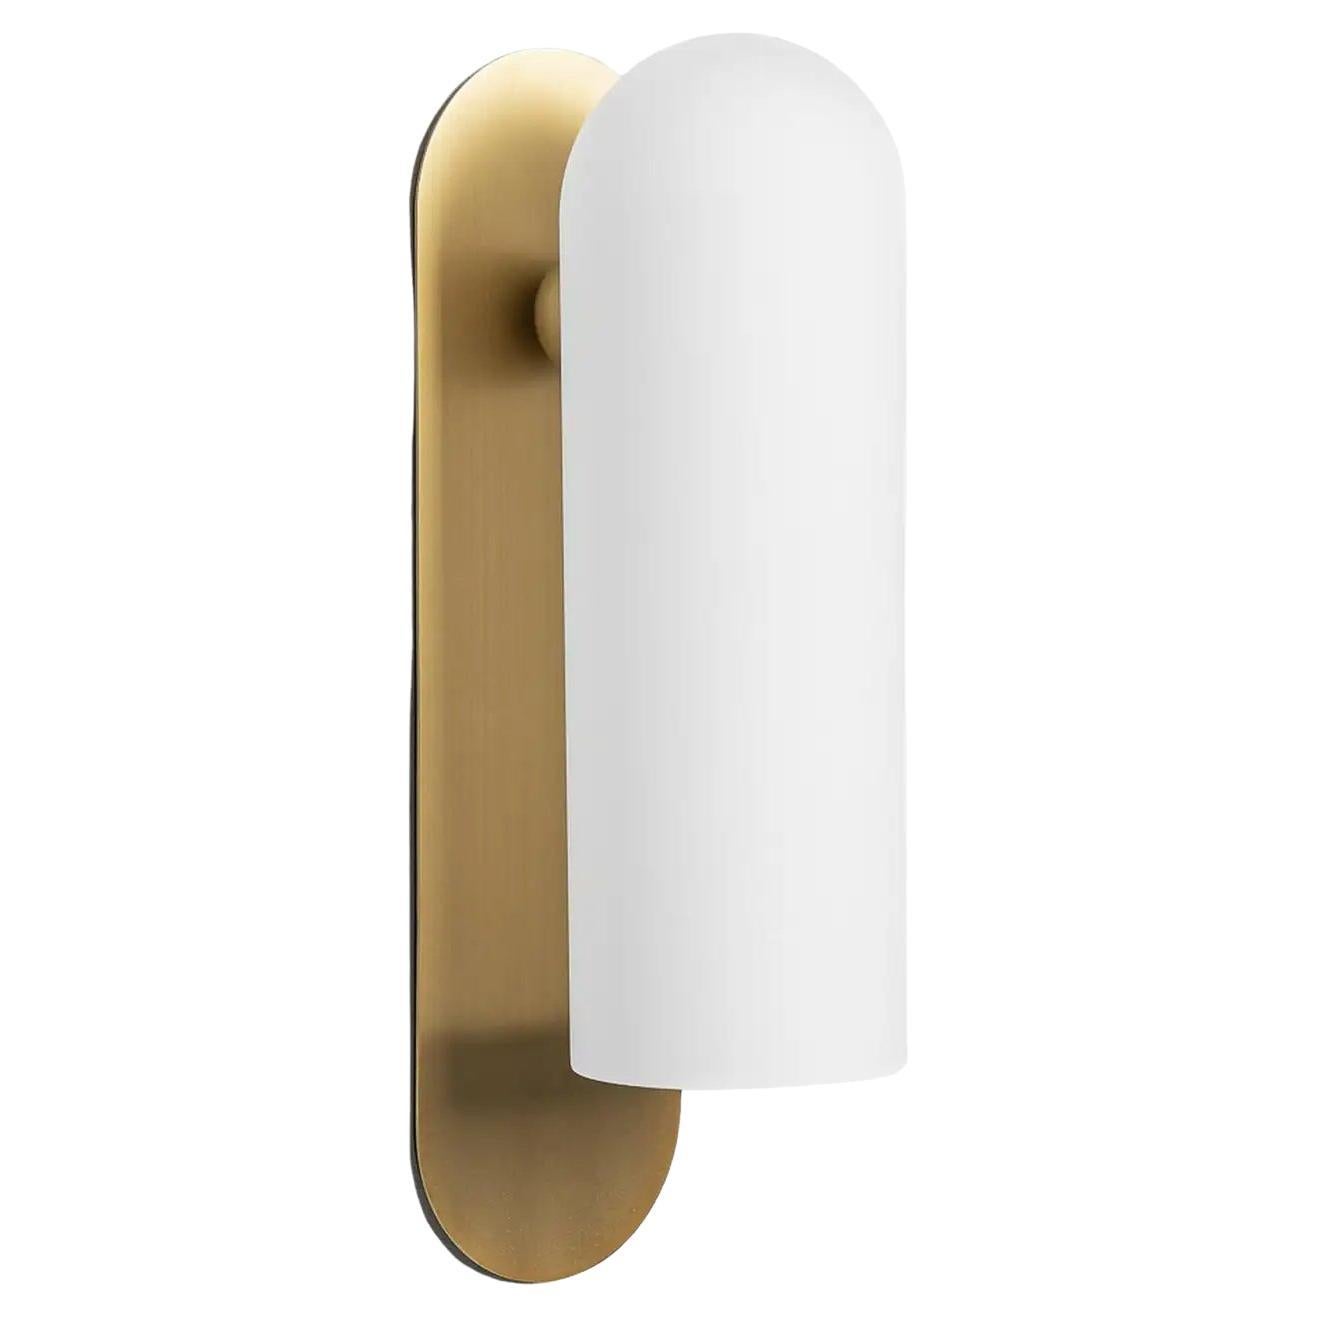 Odyssey LG Brass Wall Sconce by Schwung For Sale